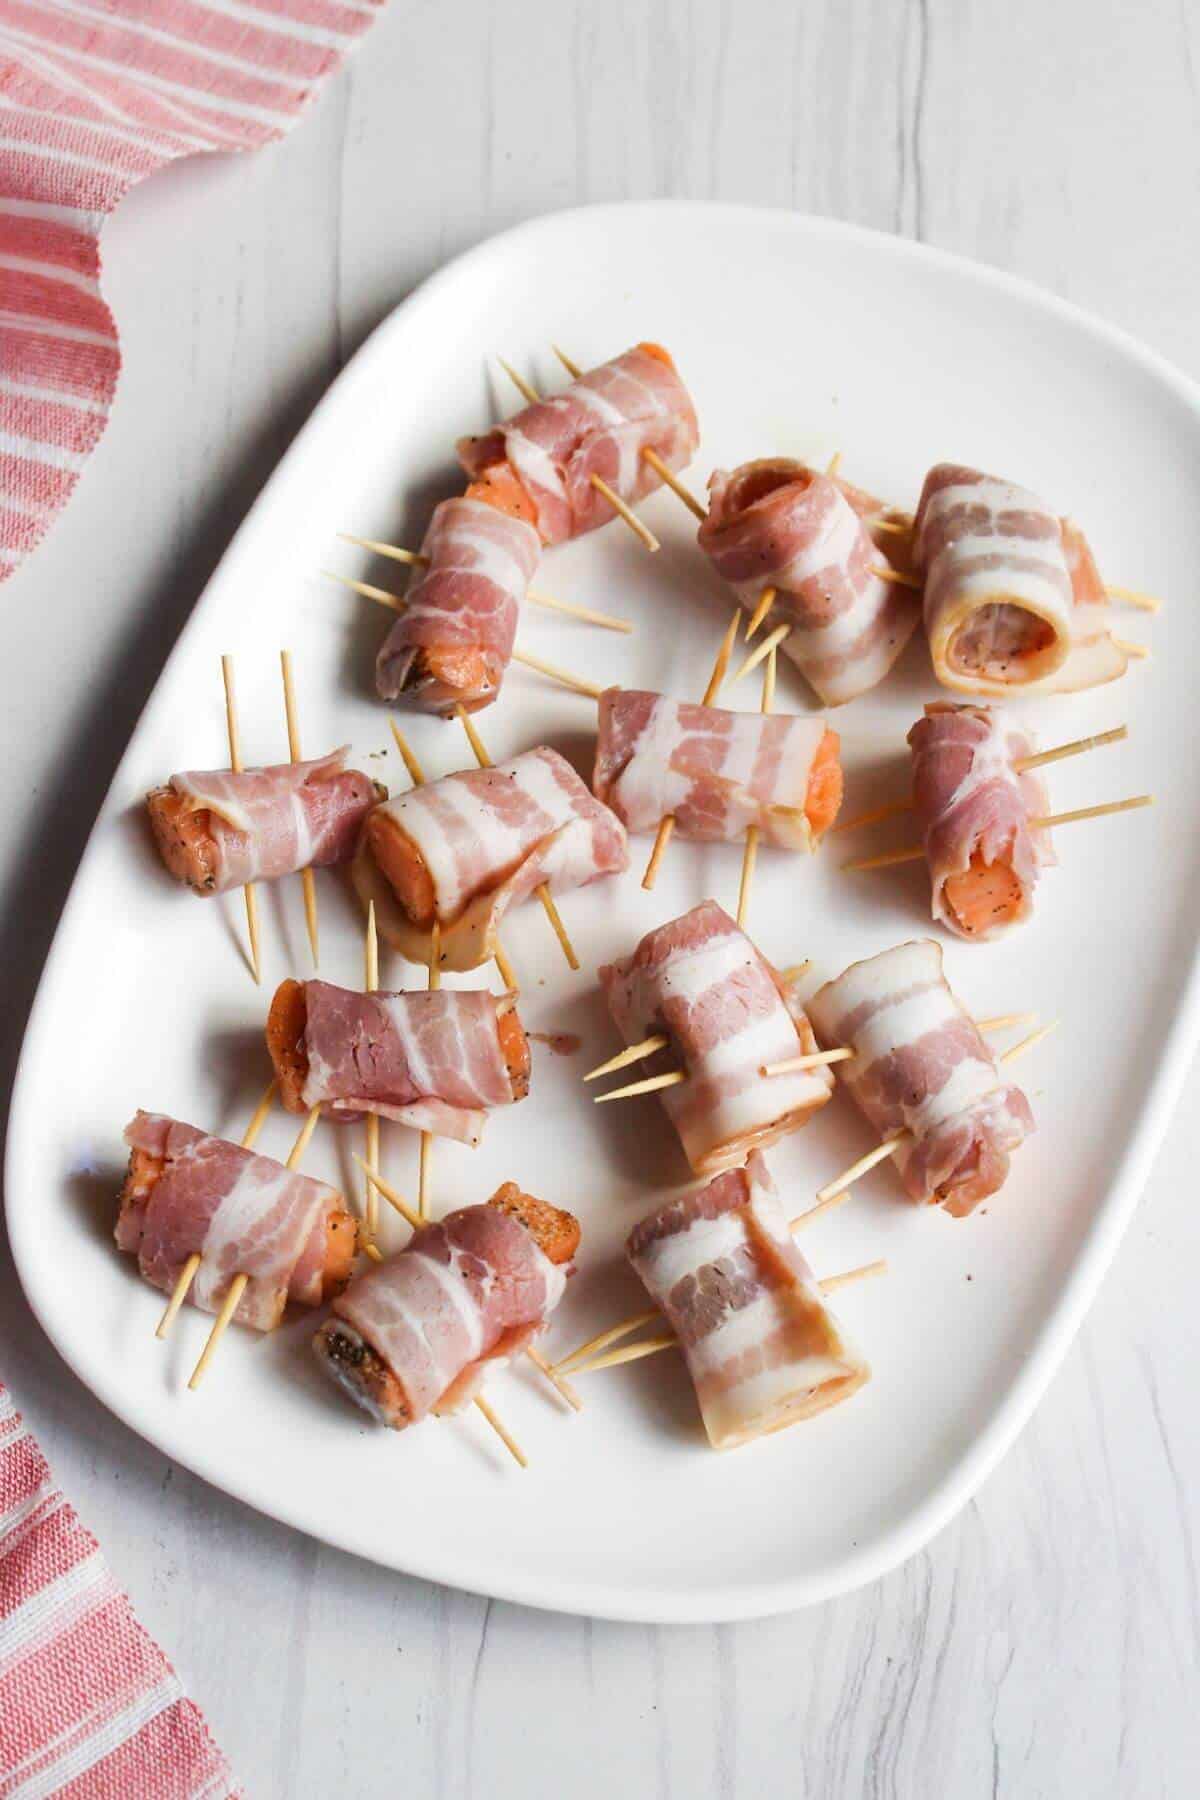 Bacon wrapped salmon bites with toothpicks inserted on a white plate.